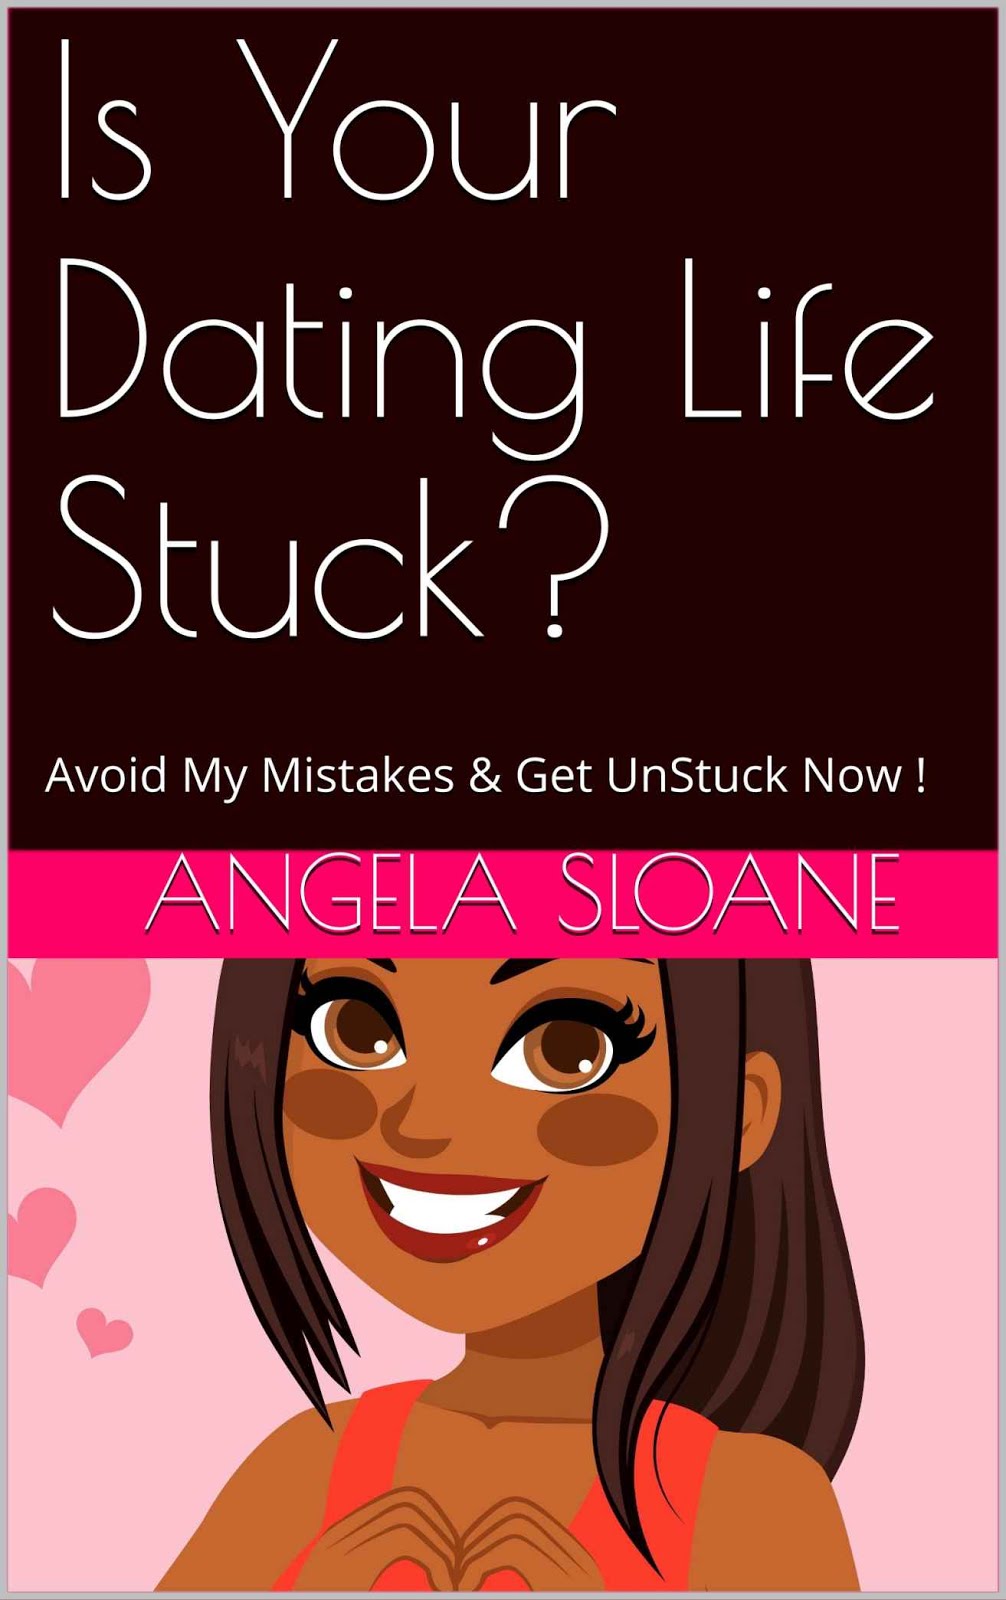 CHANGE YOUR DATING LIFE NOW!